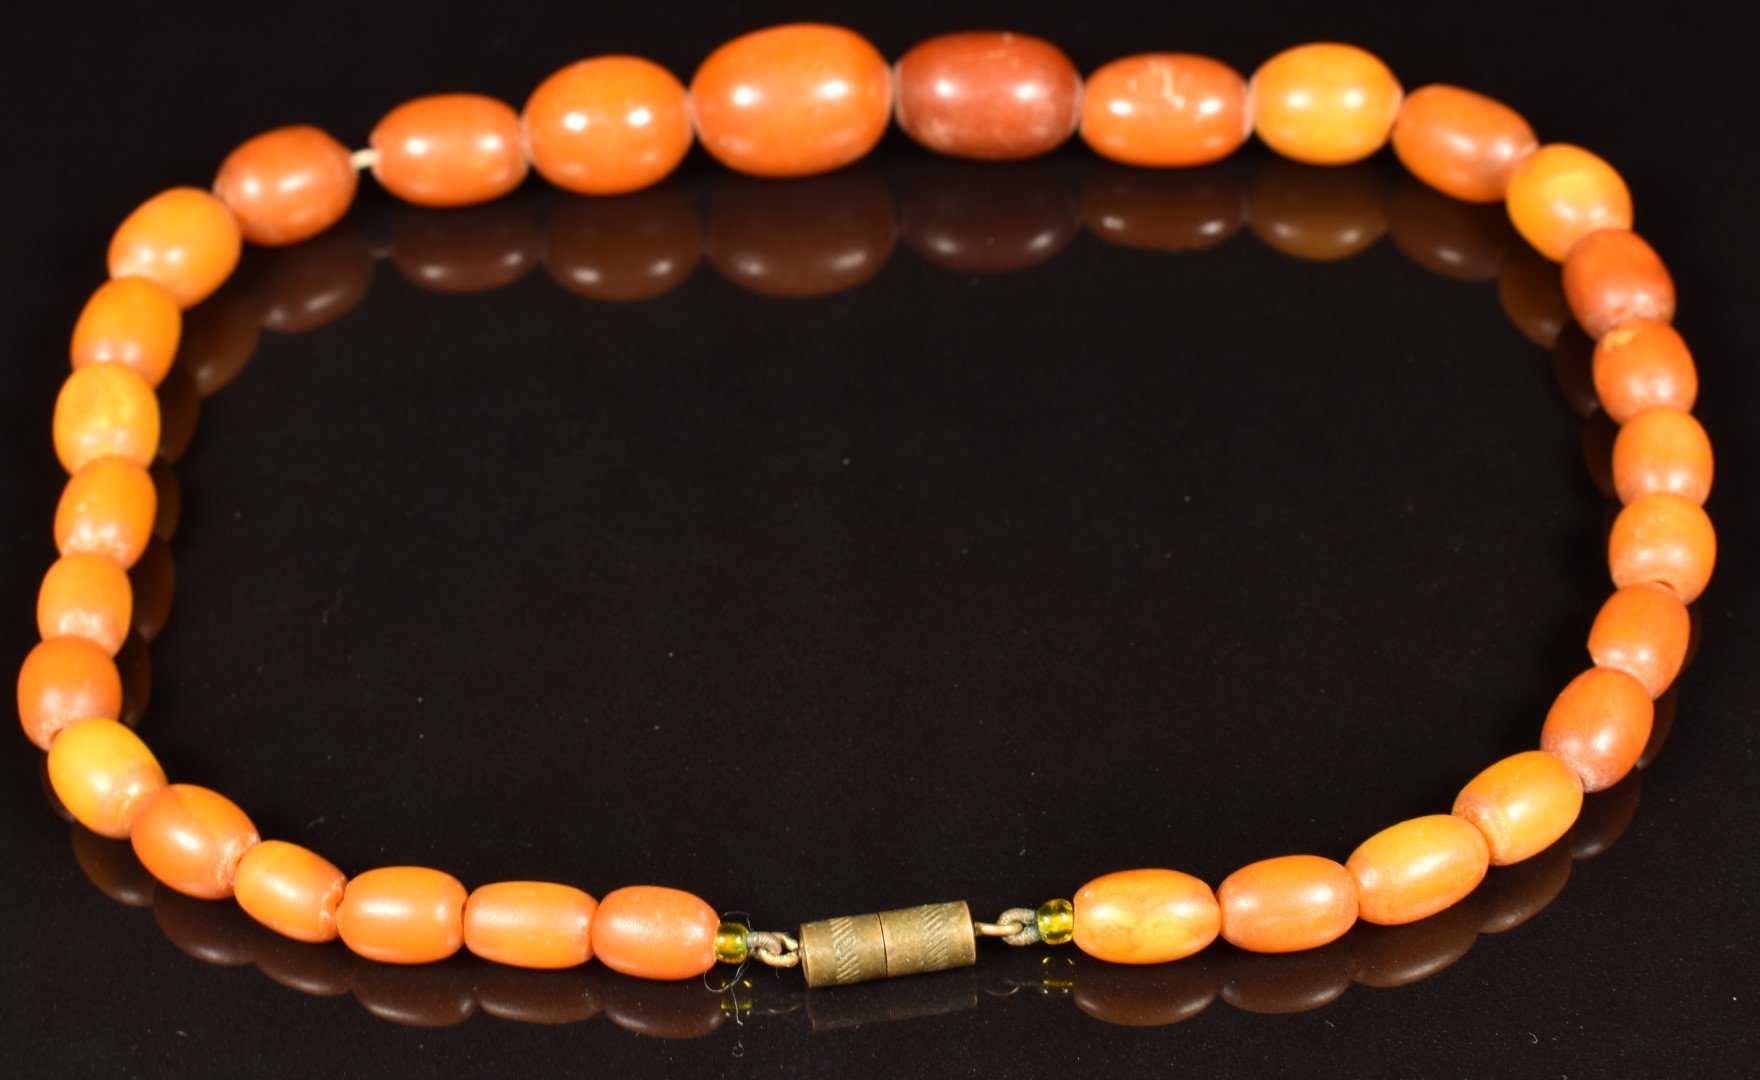 Baltic amber necklace made up of 31 oval beads, the largest bead 14 x 19mm, 21.9g - Image 2 of 2